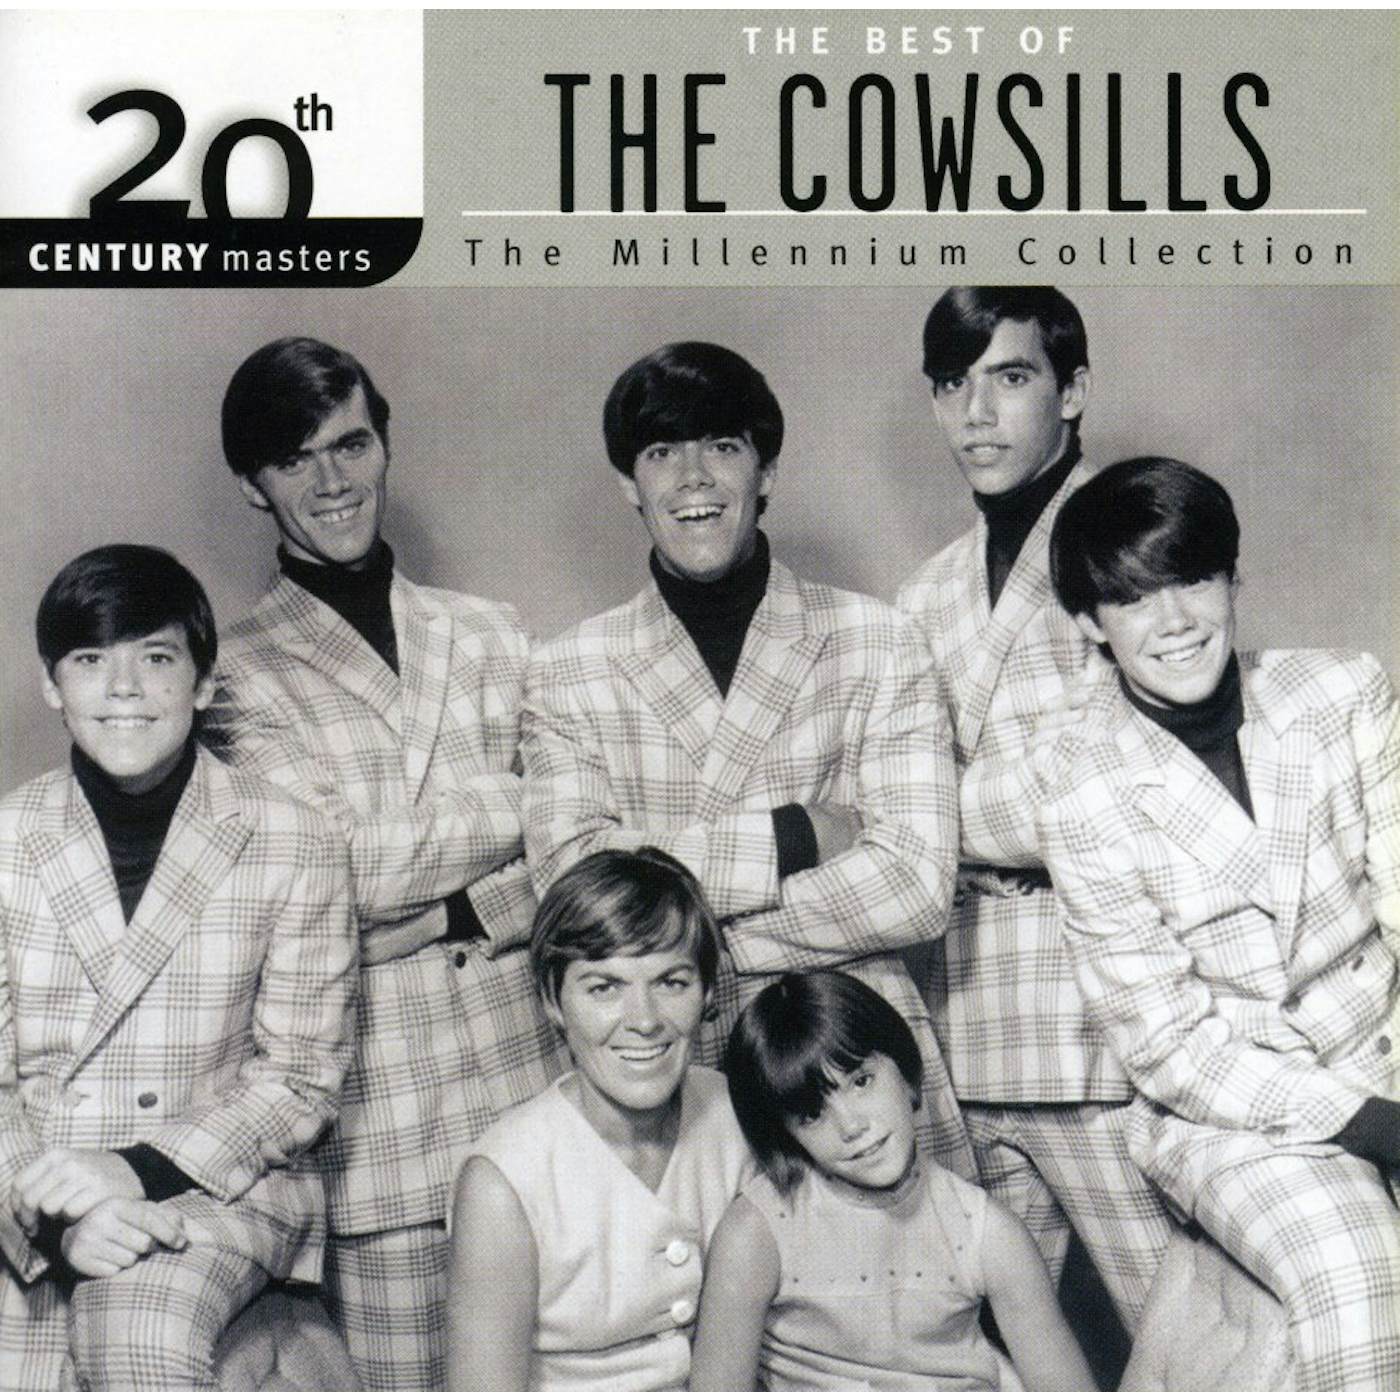 The Cowsills 20TH CENTURY MASTERS: MILLENNIUM COLLECTION CD